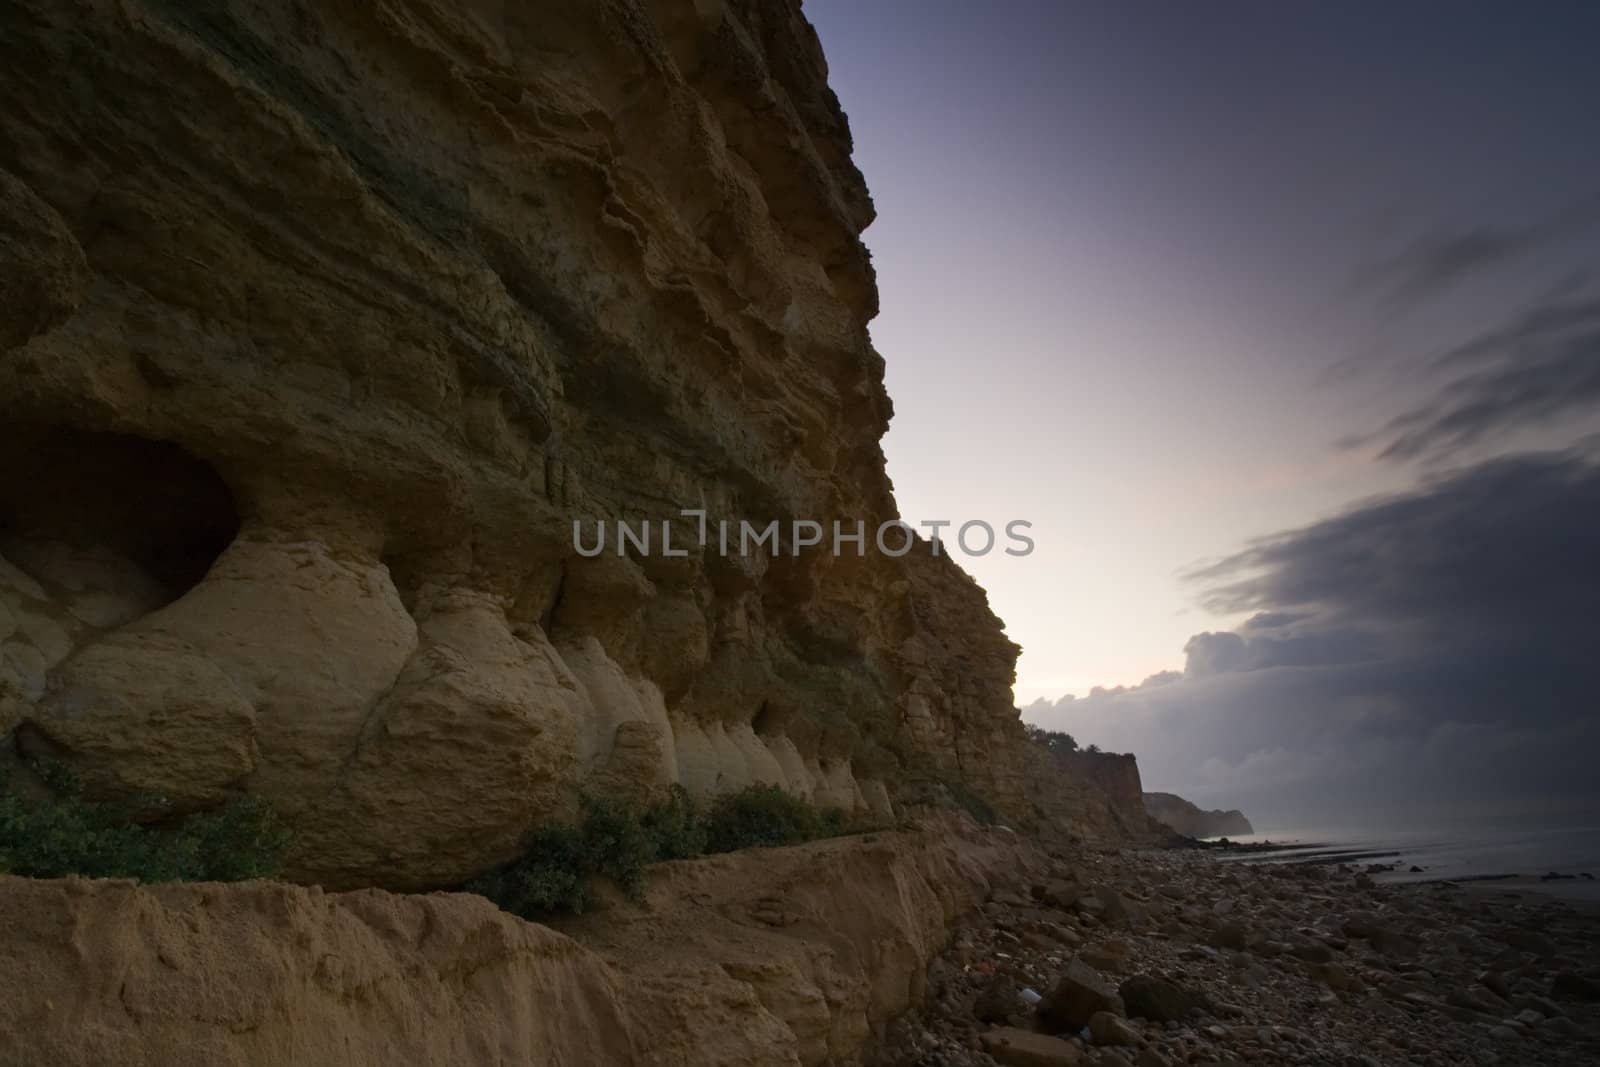 Cliff detail fading into an early morning sky, along the beaches in Lagos, Portugal.